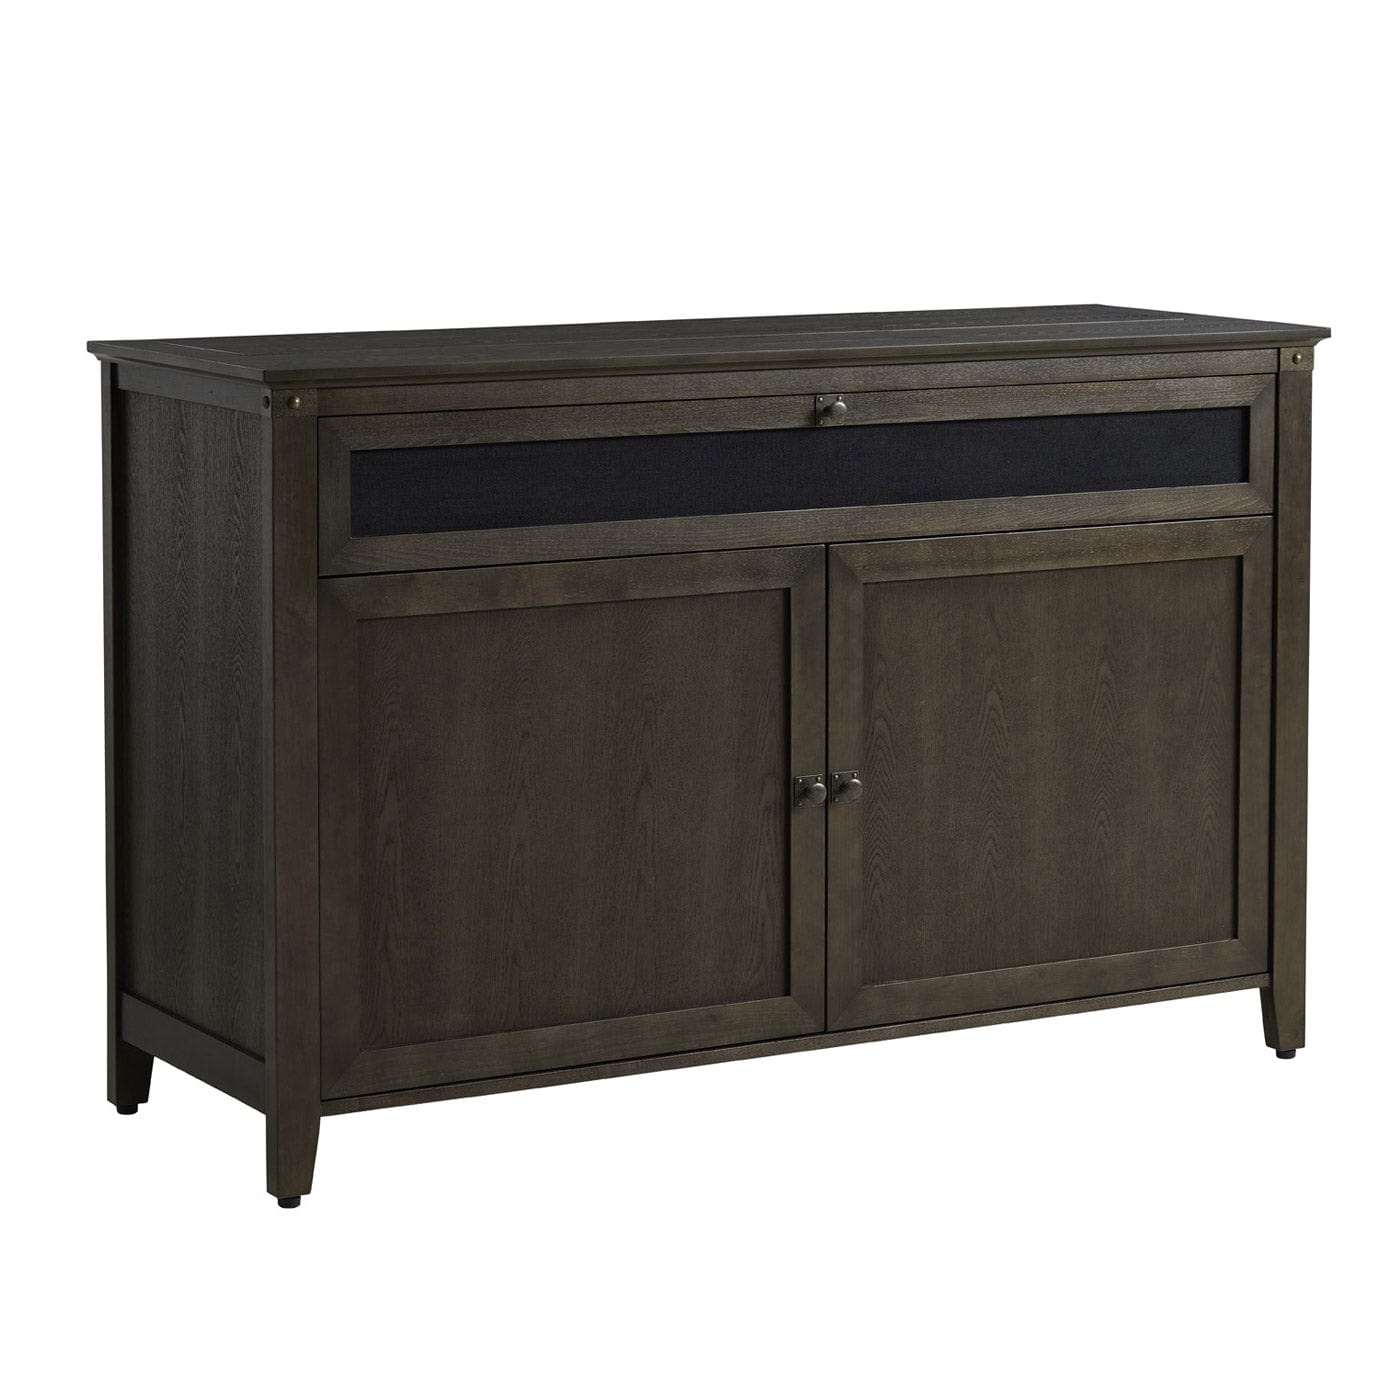 https://cdn.shopify.com/s/files/1/1817/4257/products/touchstone-claymont-tv-lift-cabinet-1400.jpg?v=1680128073